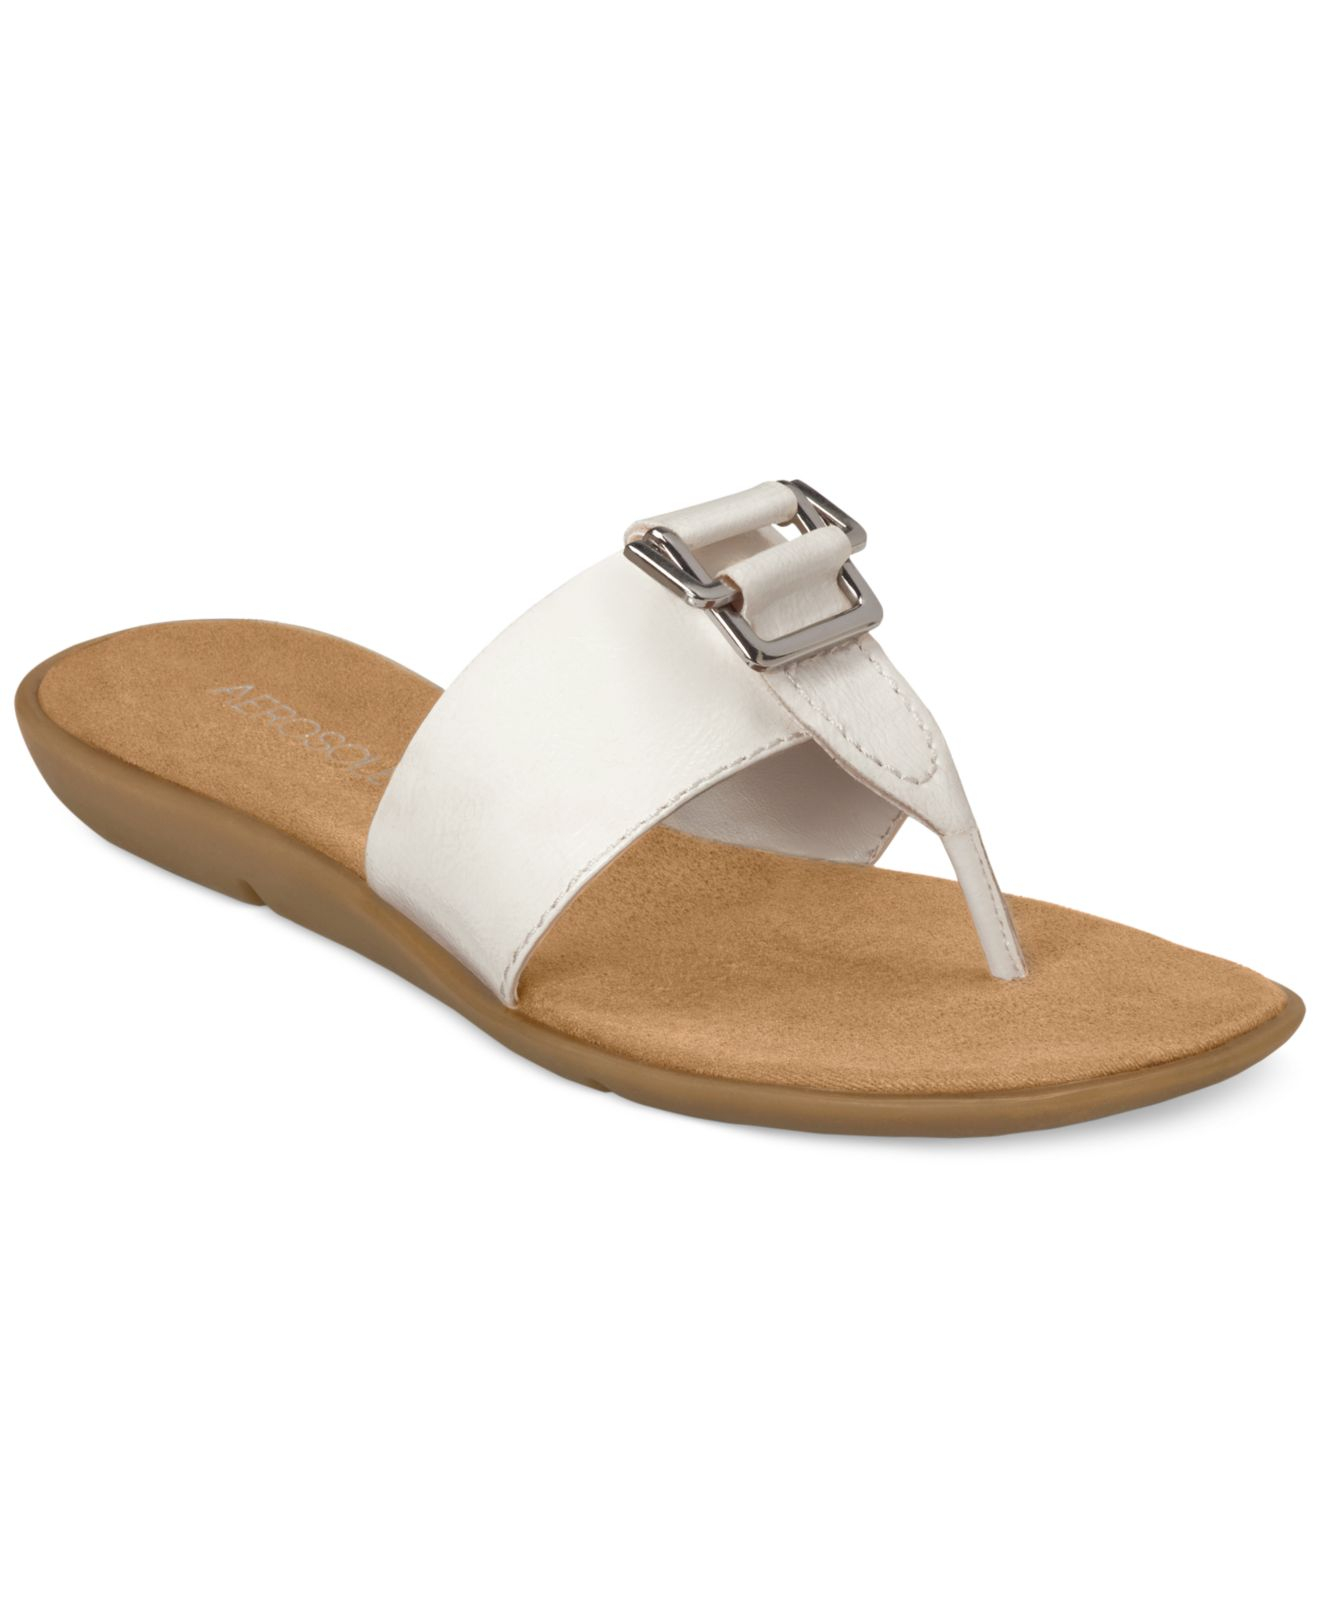 Aerosoles Savvy Flat Thong Sandals in White (White Patent) | Lyst